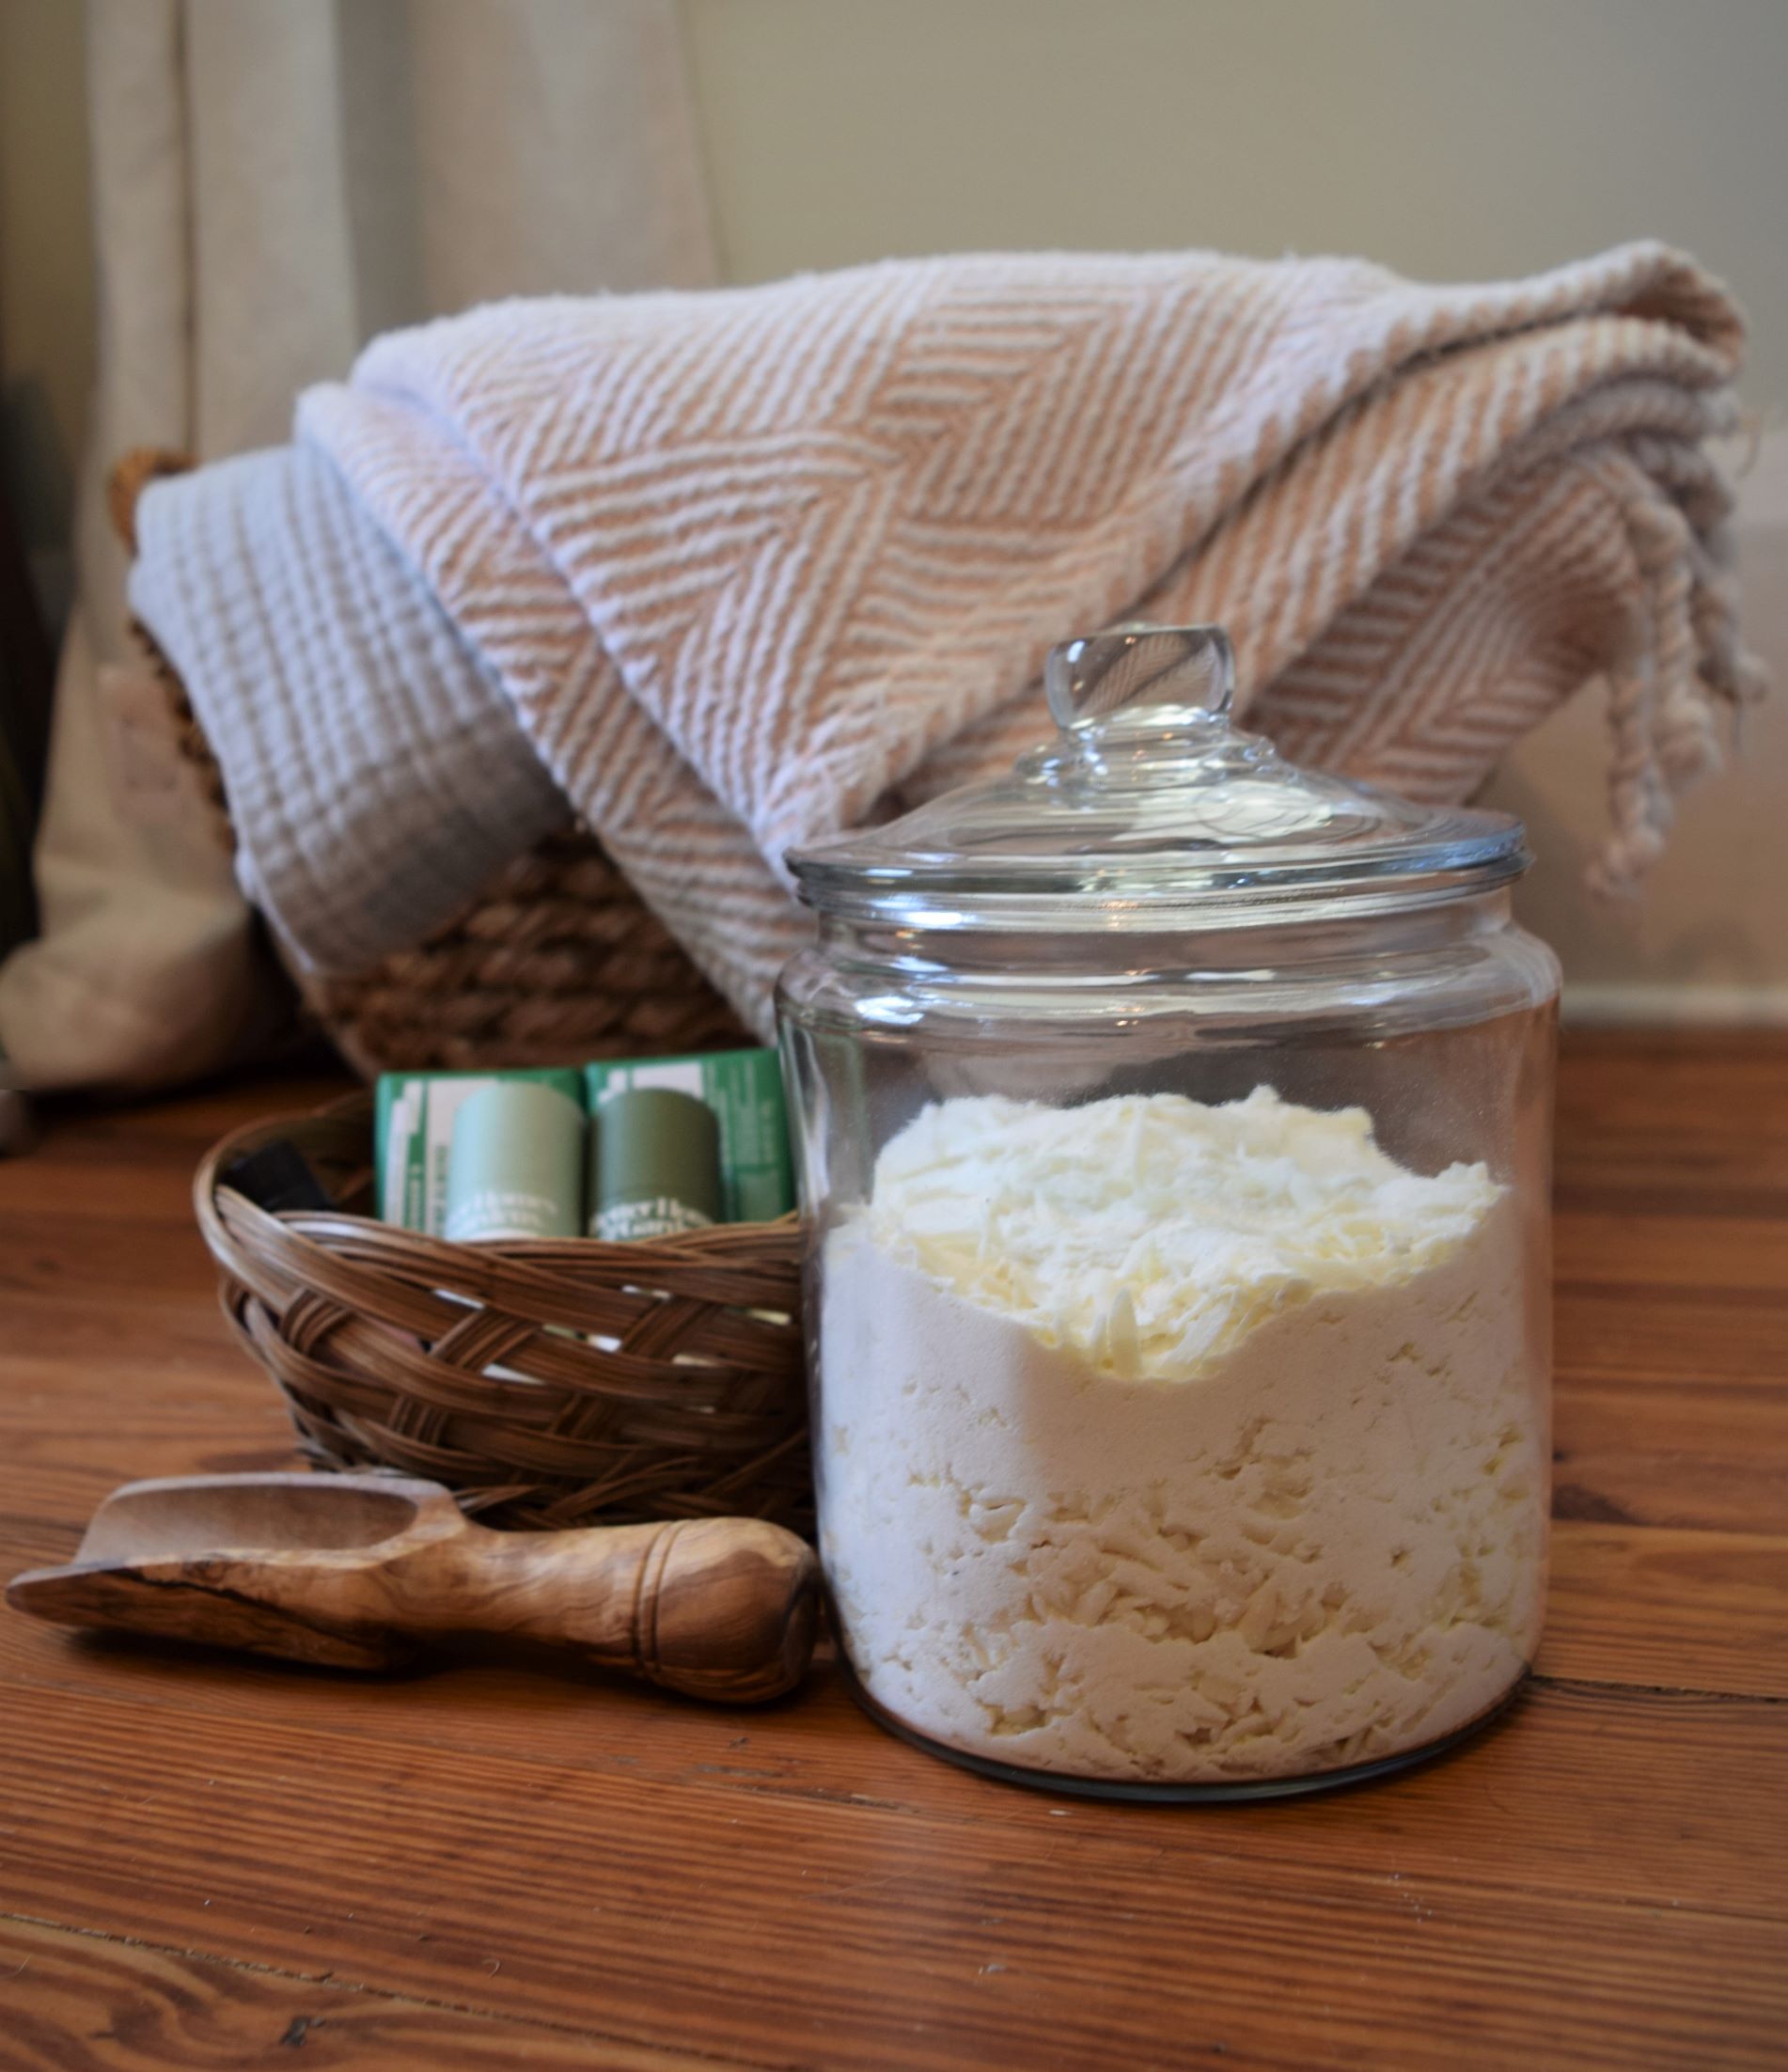 Homemade Natural Laundry Detergent: Fall Spice Edition!